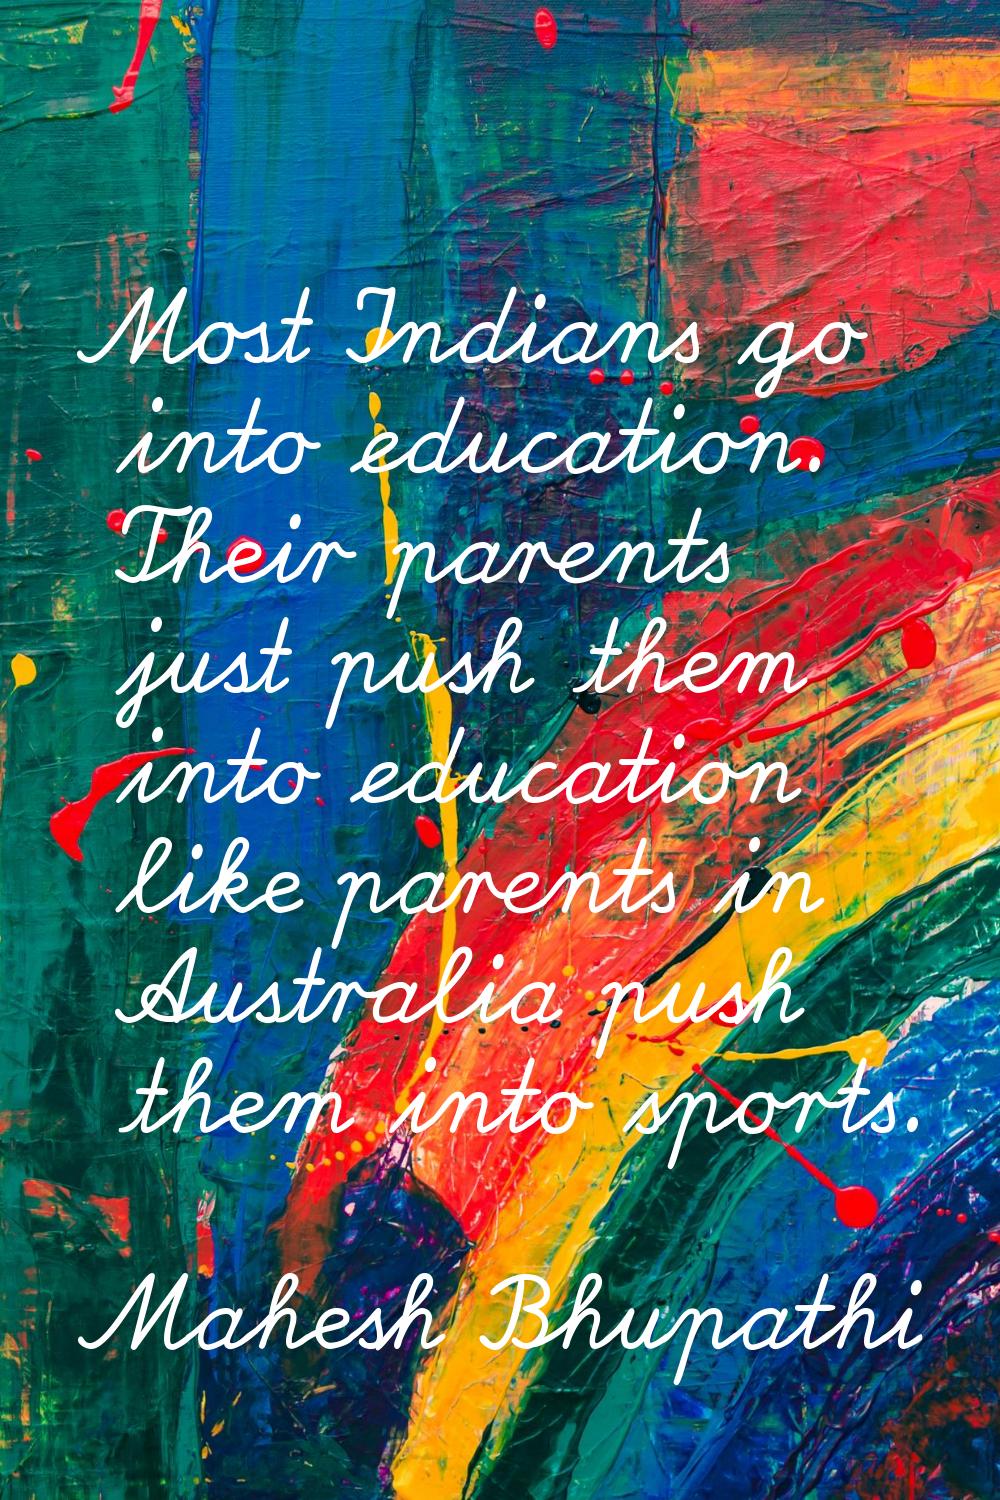 Most Indians go into education. Their parents just push them into education like parents in Austral